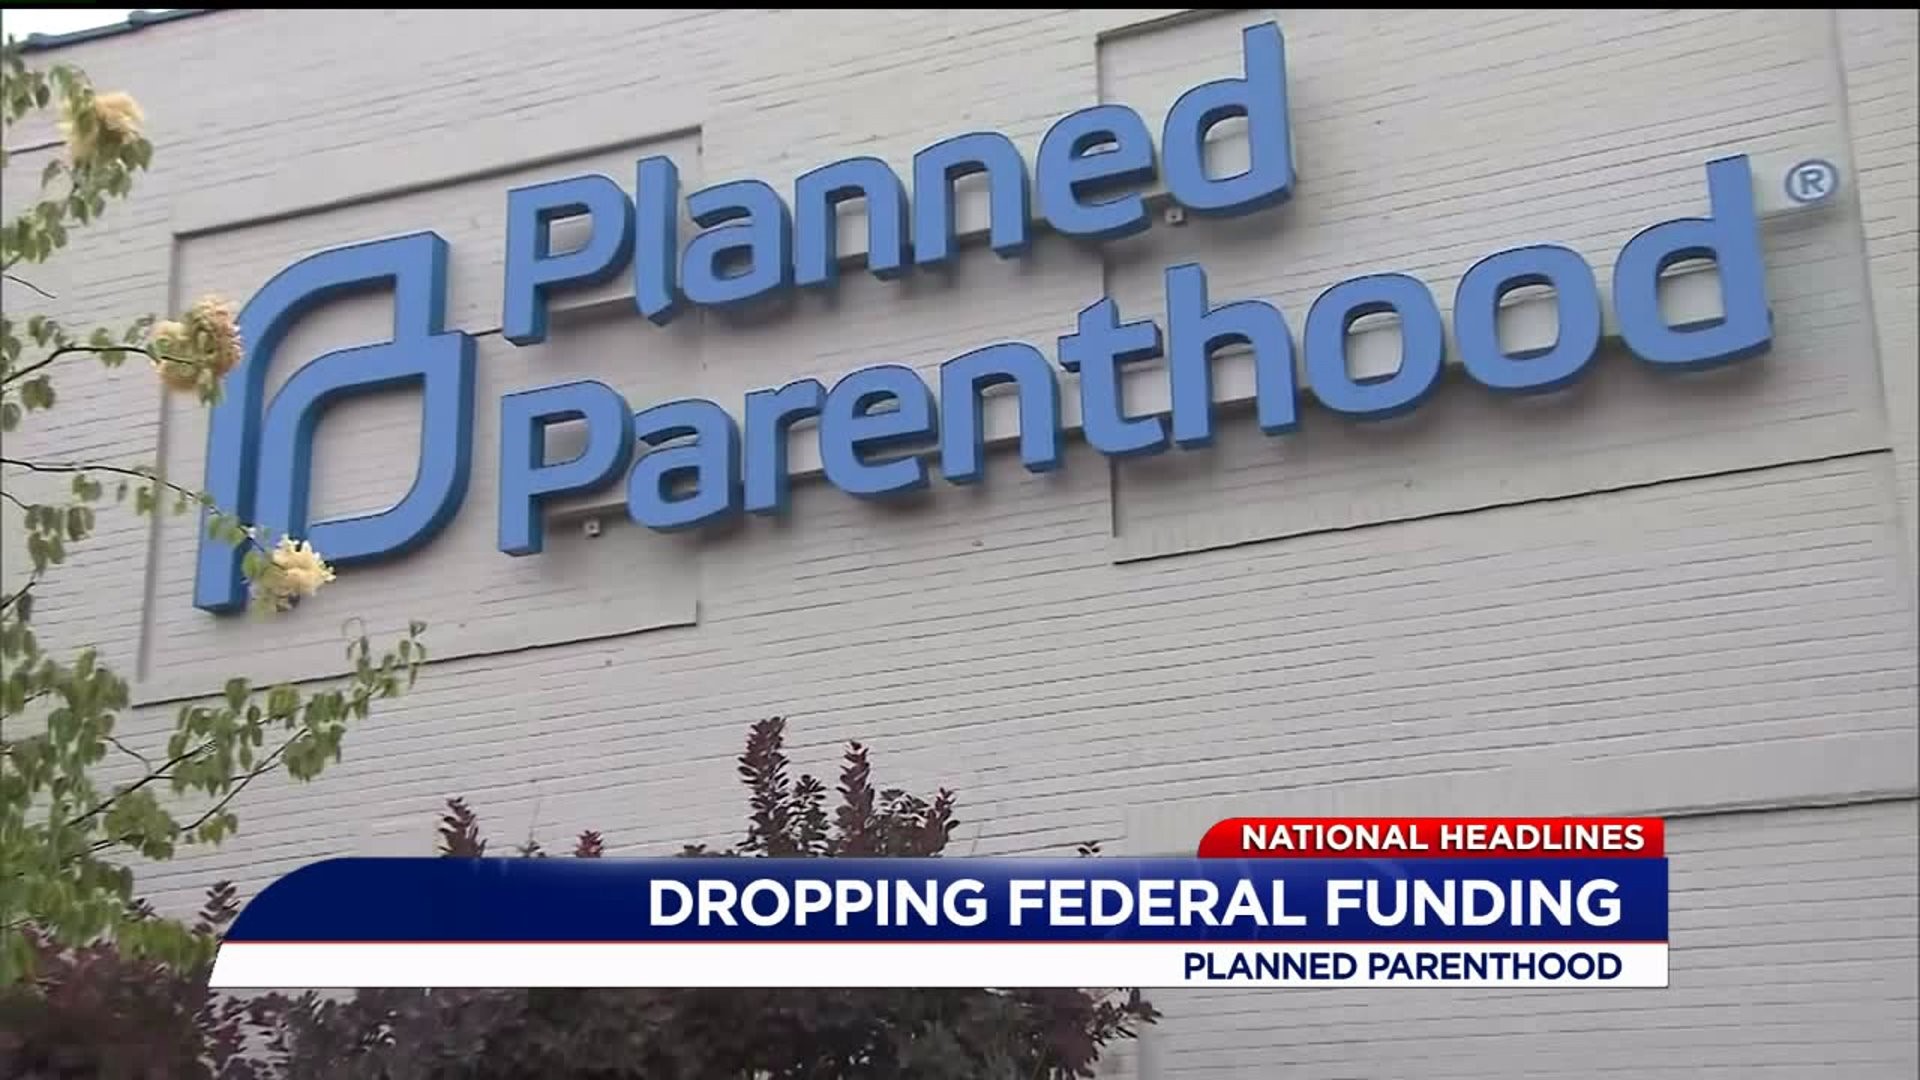 Planned Parenthood drops federal funding